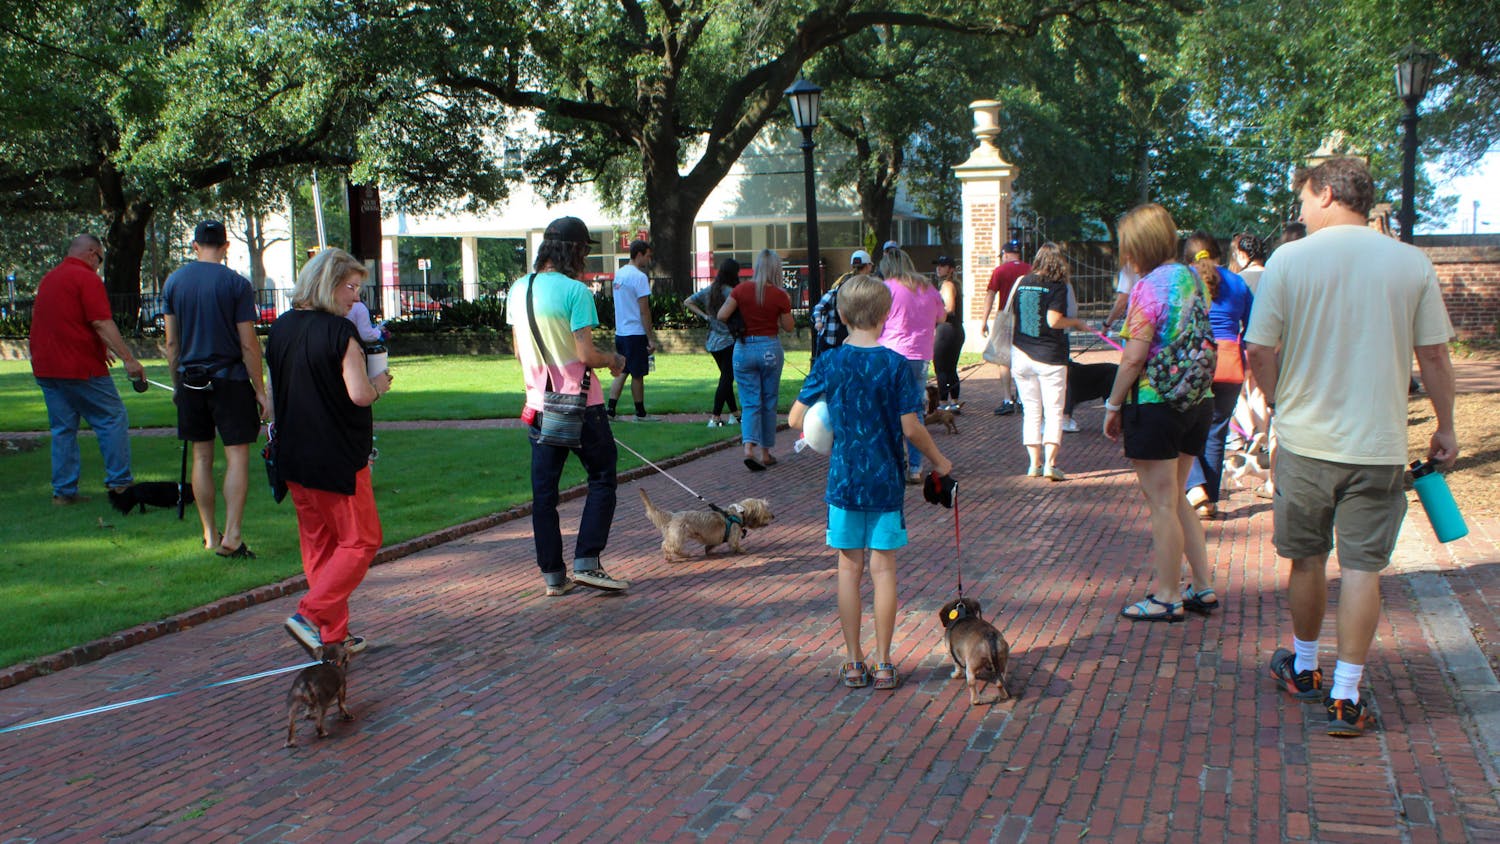 Members of the Dachshunds of Columbia group walk through the USC Horseshoe during their community dog walk on Sept. 17, 2022. The Columbia dog-walking group gathered with their furry friends for a walk through USC's Horseshoe on Saturday morning.